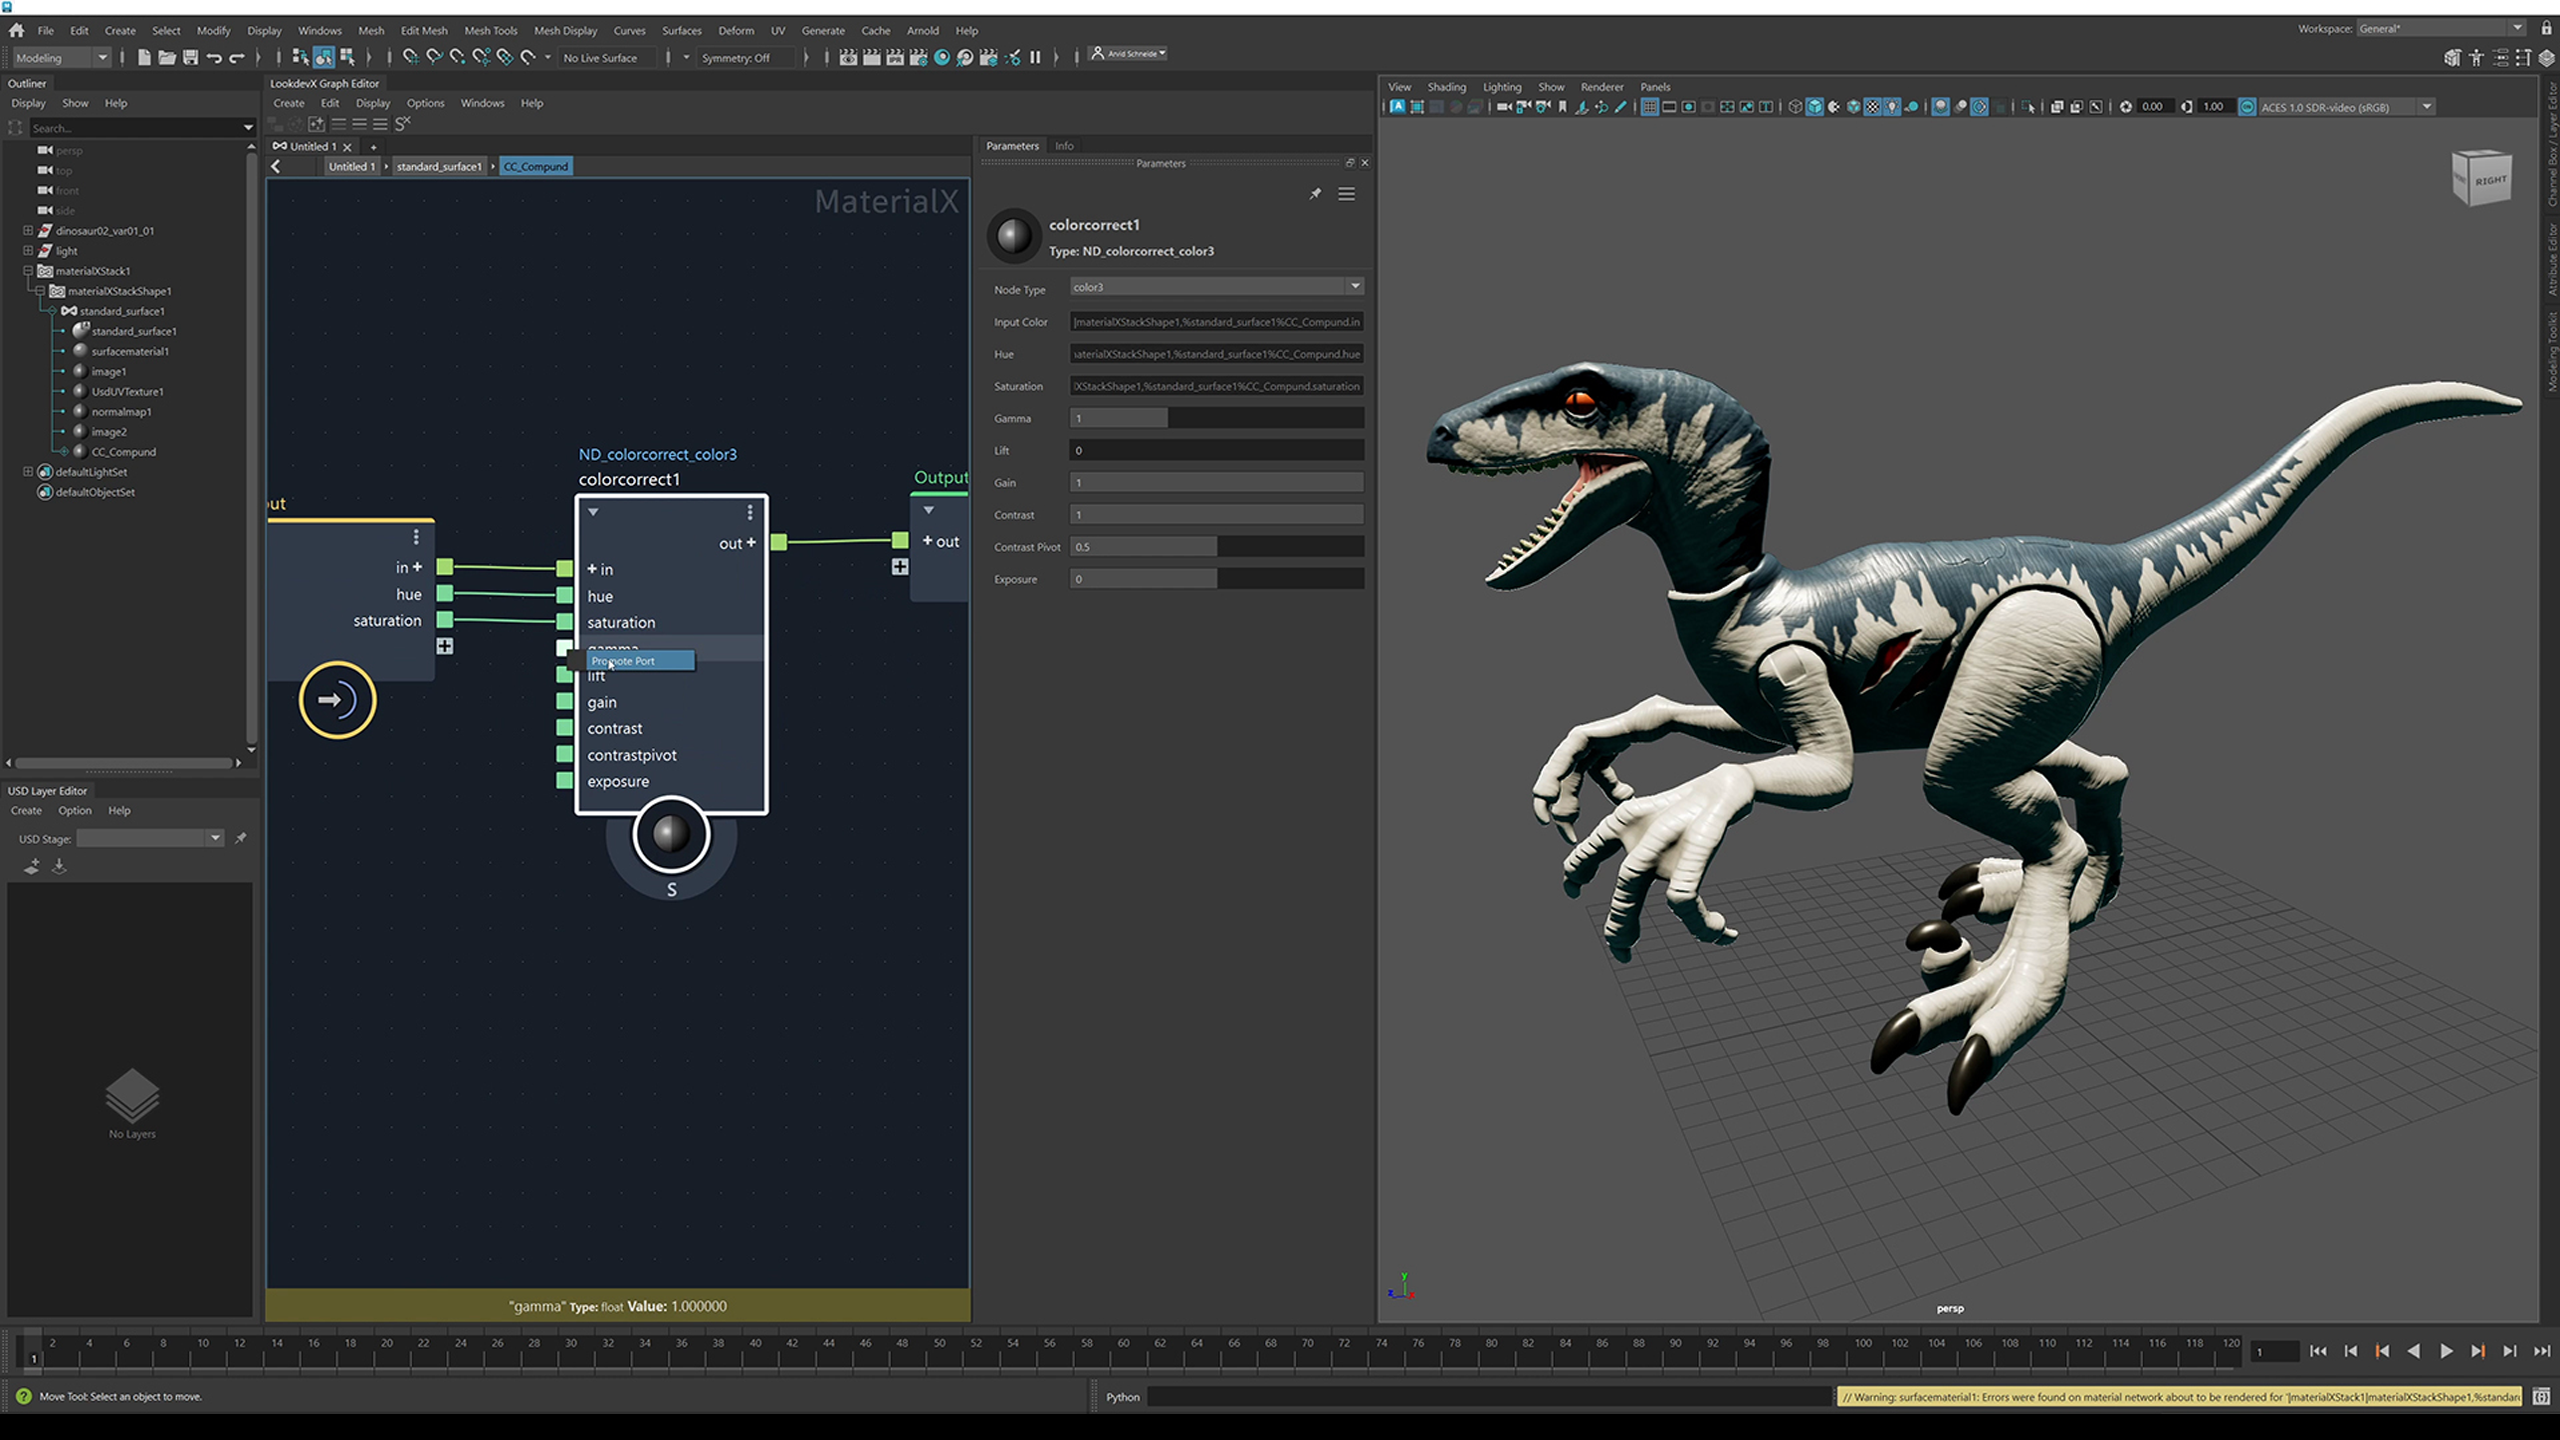 Autodesk announces new tools for Maya, 3ds Max; a dinosaur model in a 3D art app